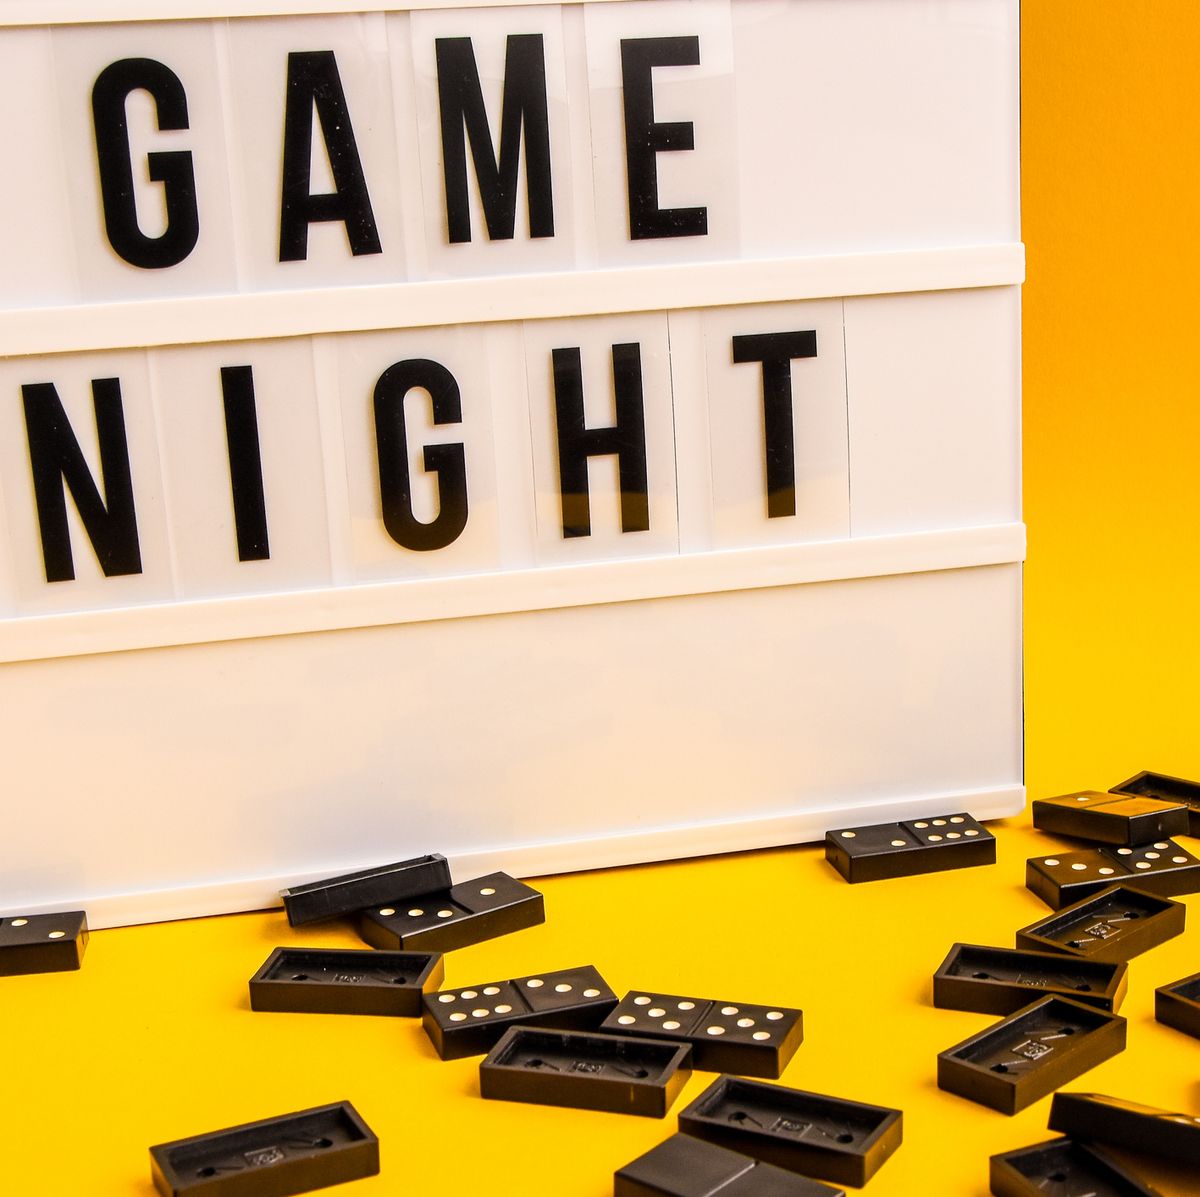 Ideas for Throwing a Virtual Game Night While Social Distancing